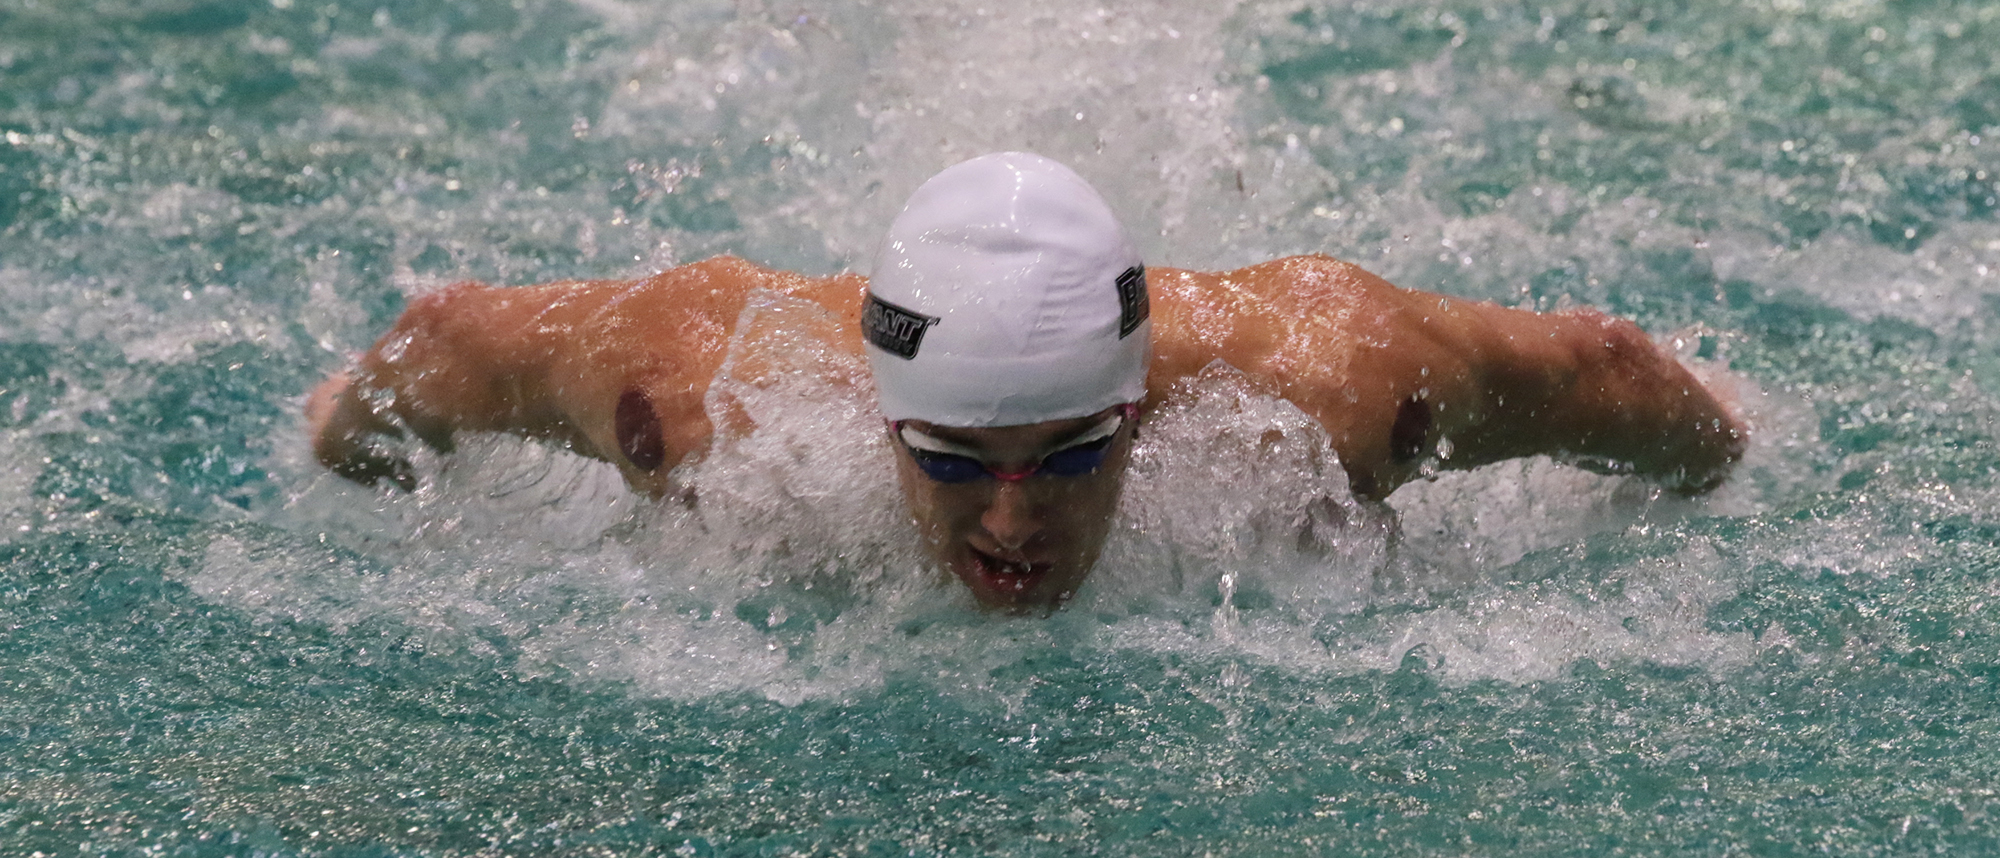 Bulldogs win Three medals at Day 3 of the MAACs